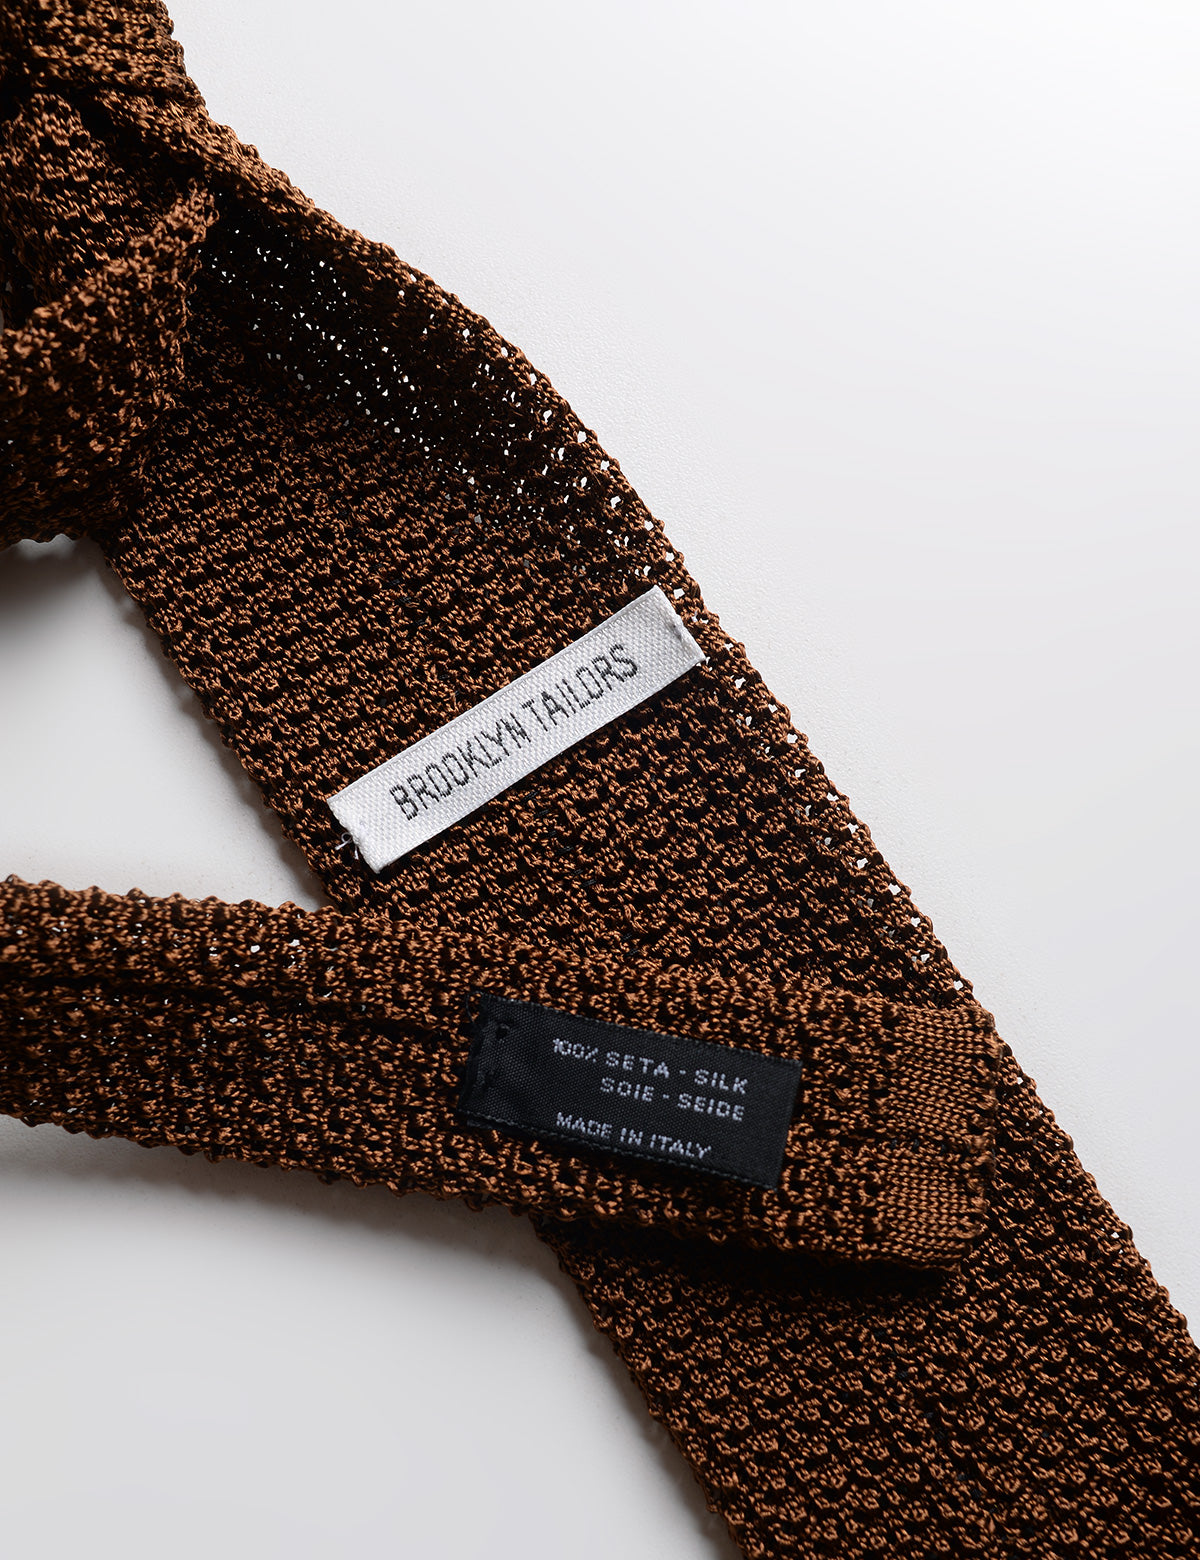 Detail of labels and knit of Italian Silk Knit Tie  - Sepia